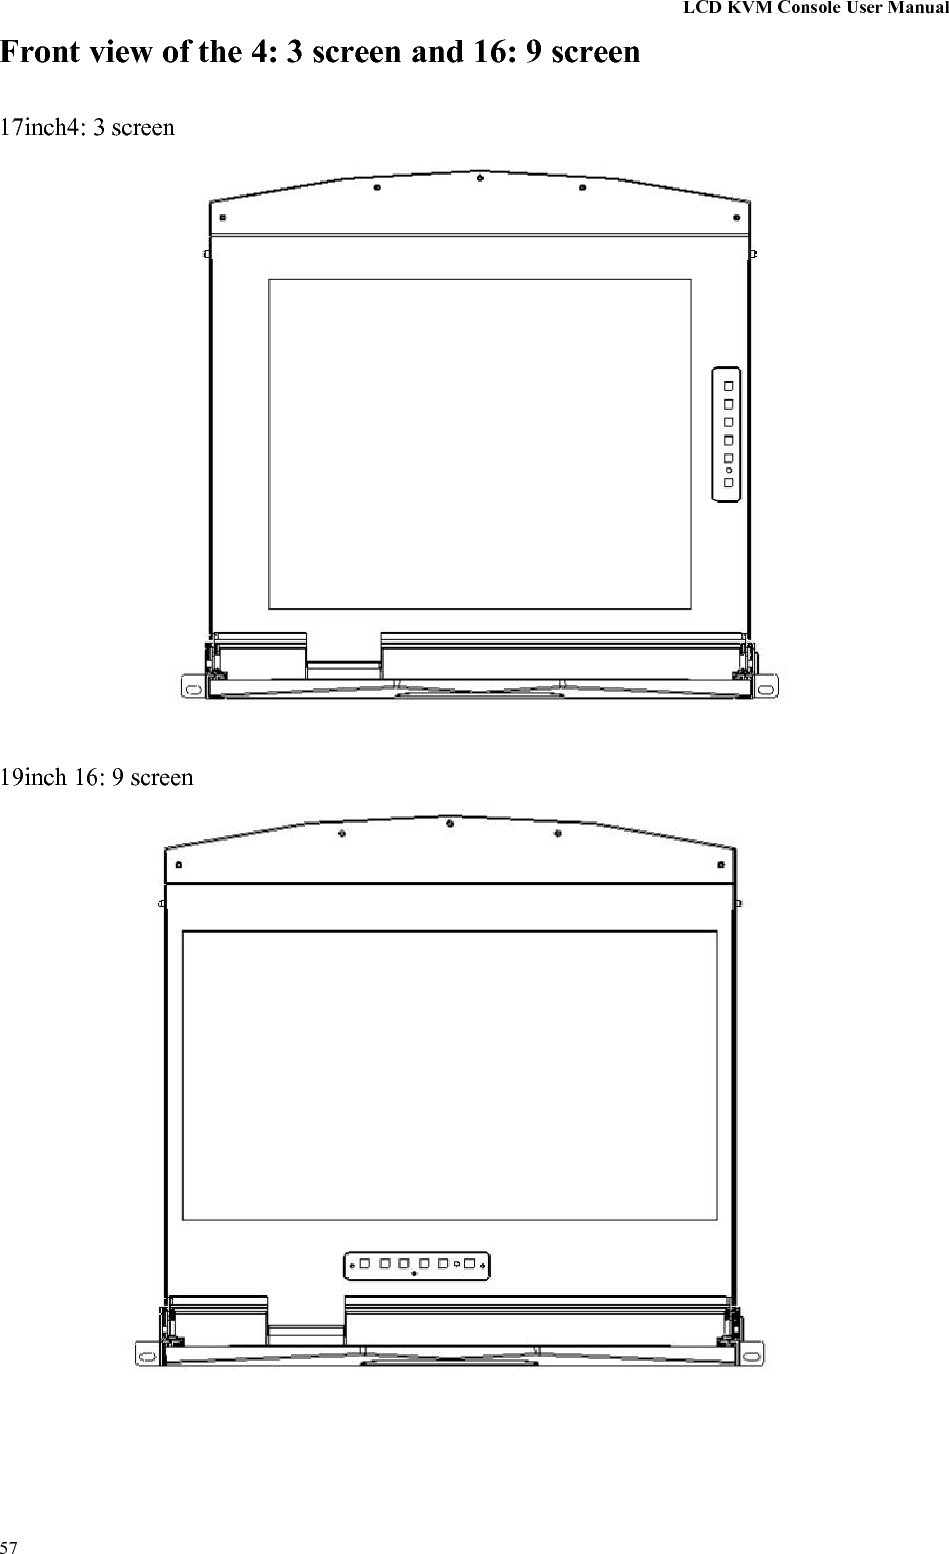 LCD KVM Console User Manual57Front view of the 4: 3 screen and 16: 9 screen17inch4: 3 screen19inch 16: 9 screen